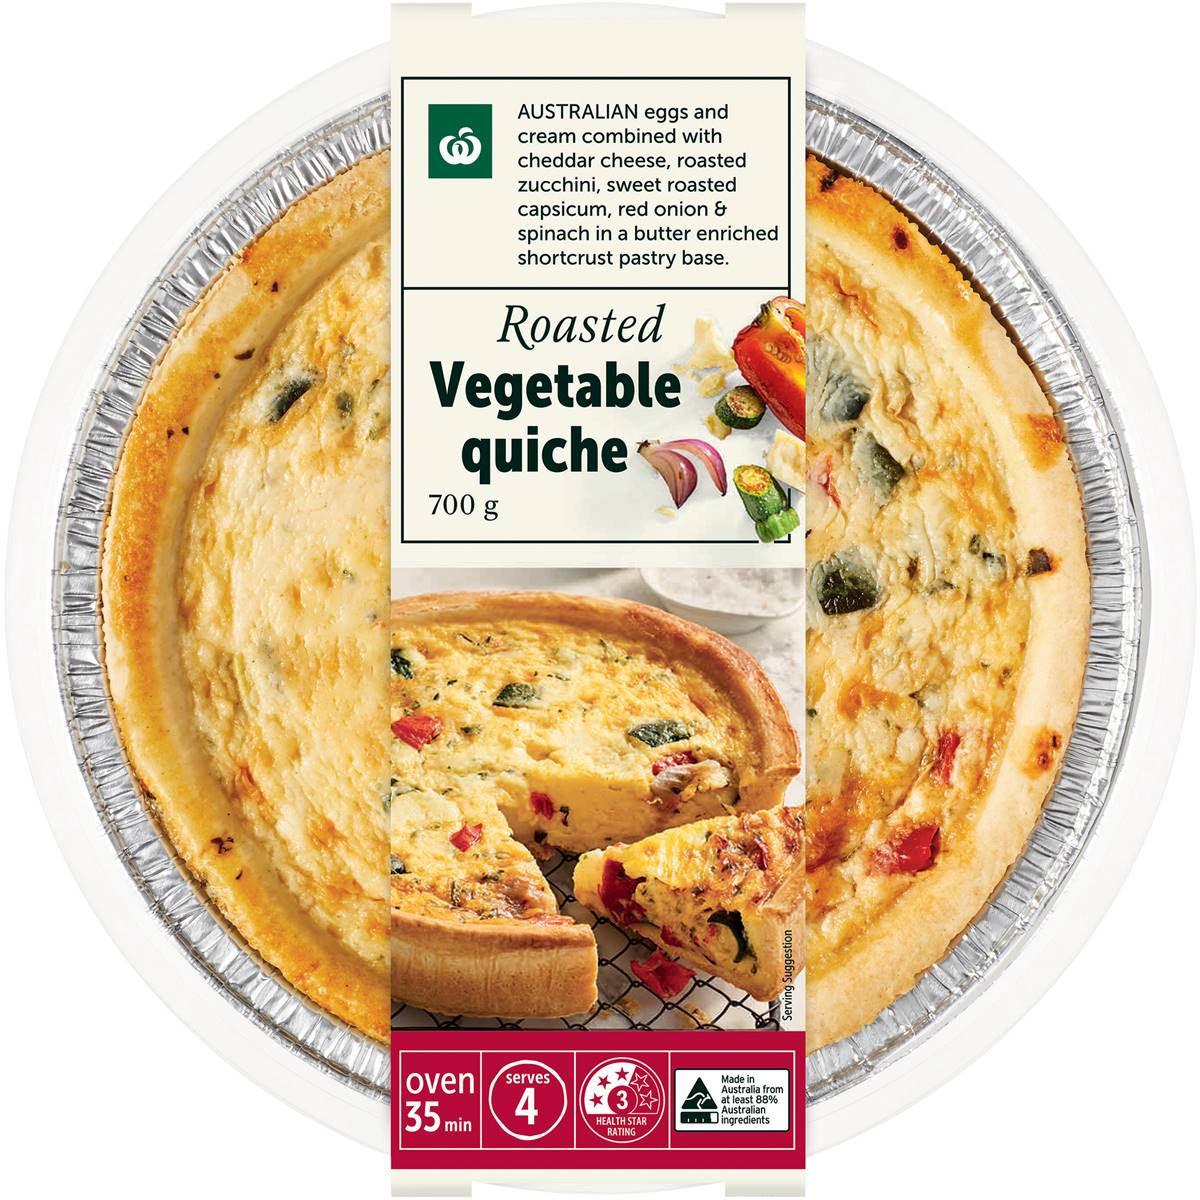 Calories in Woolworths Roasted Vegetable Quiche